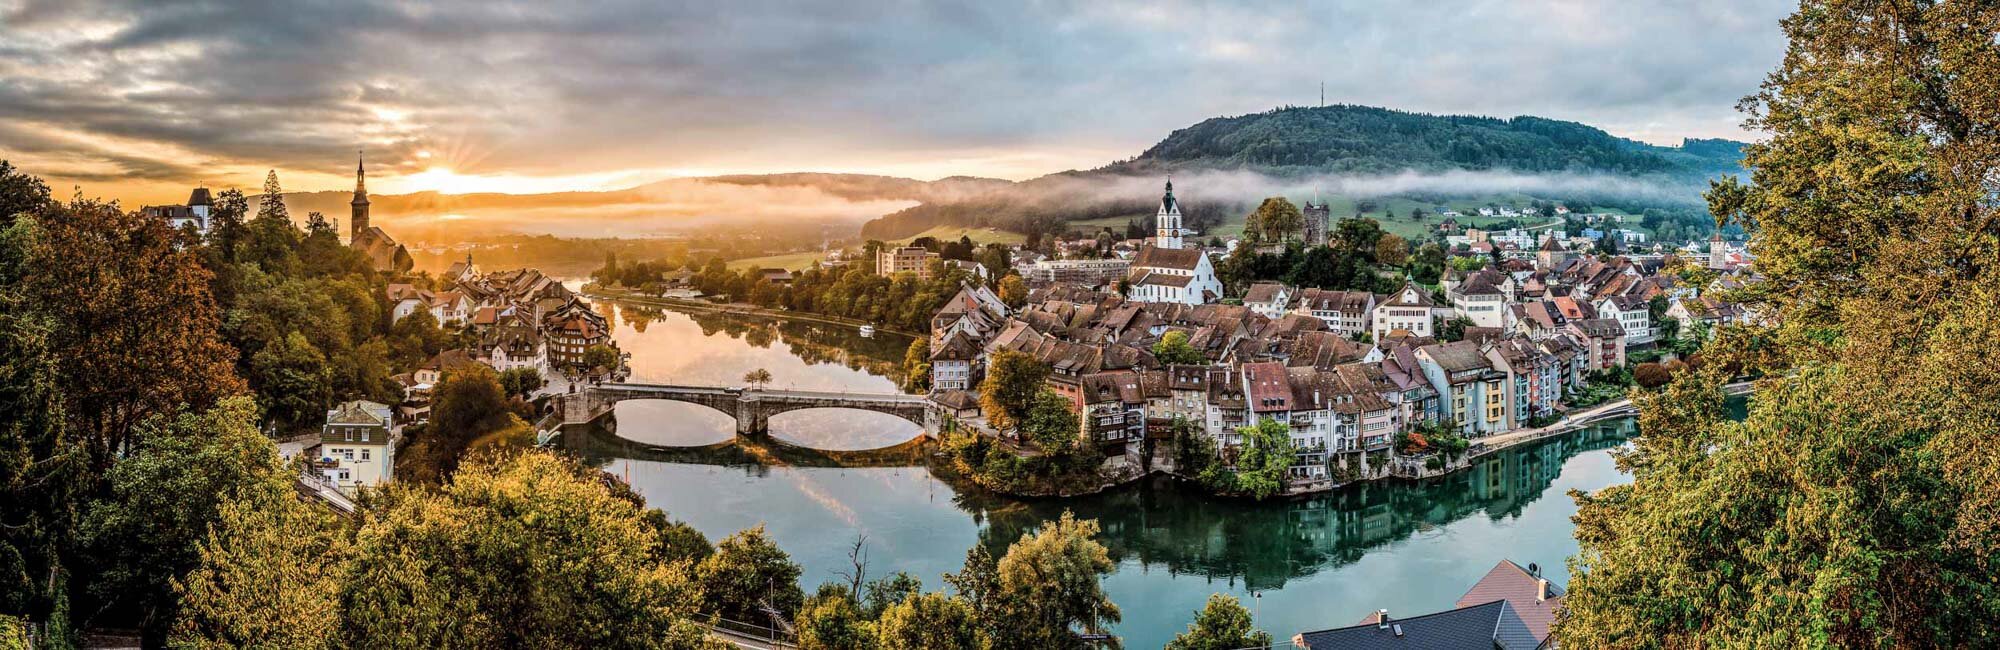 The main city of the district Laufenburg is located on the Upper Rhine on the border with Germany (left side), in the northeast of the Fricktal region. Copyright by: Switzerland Tourism